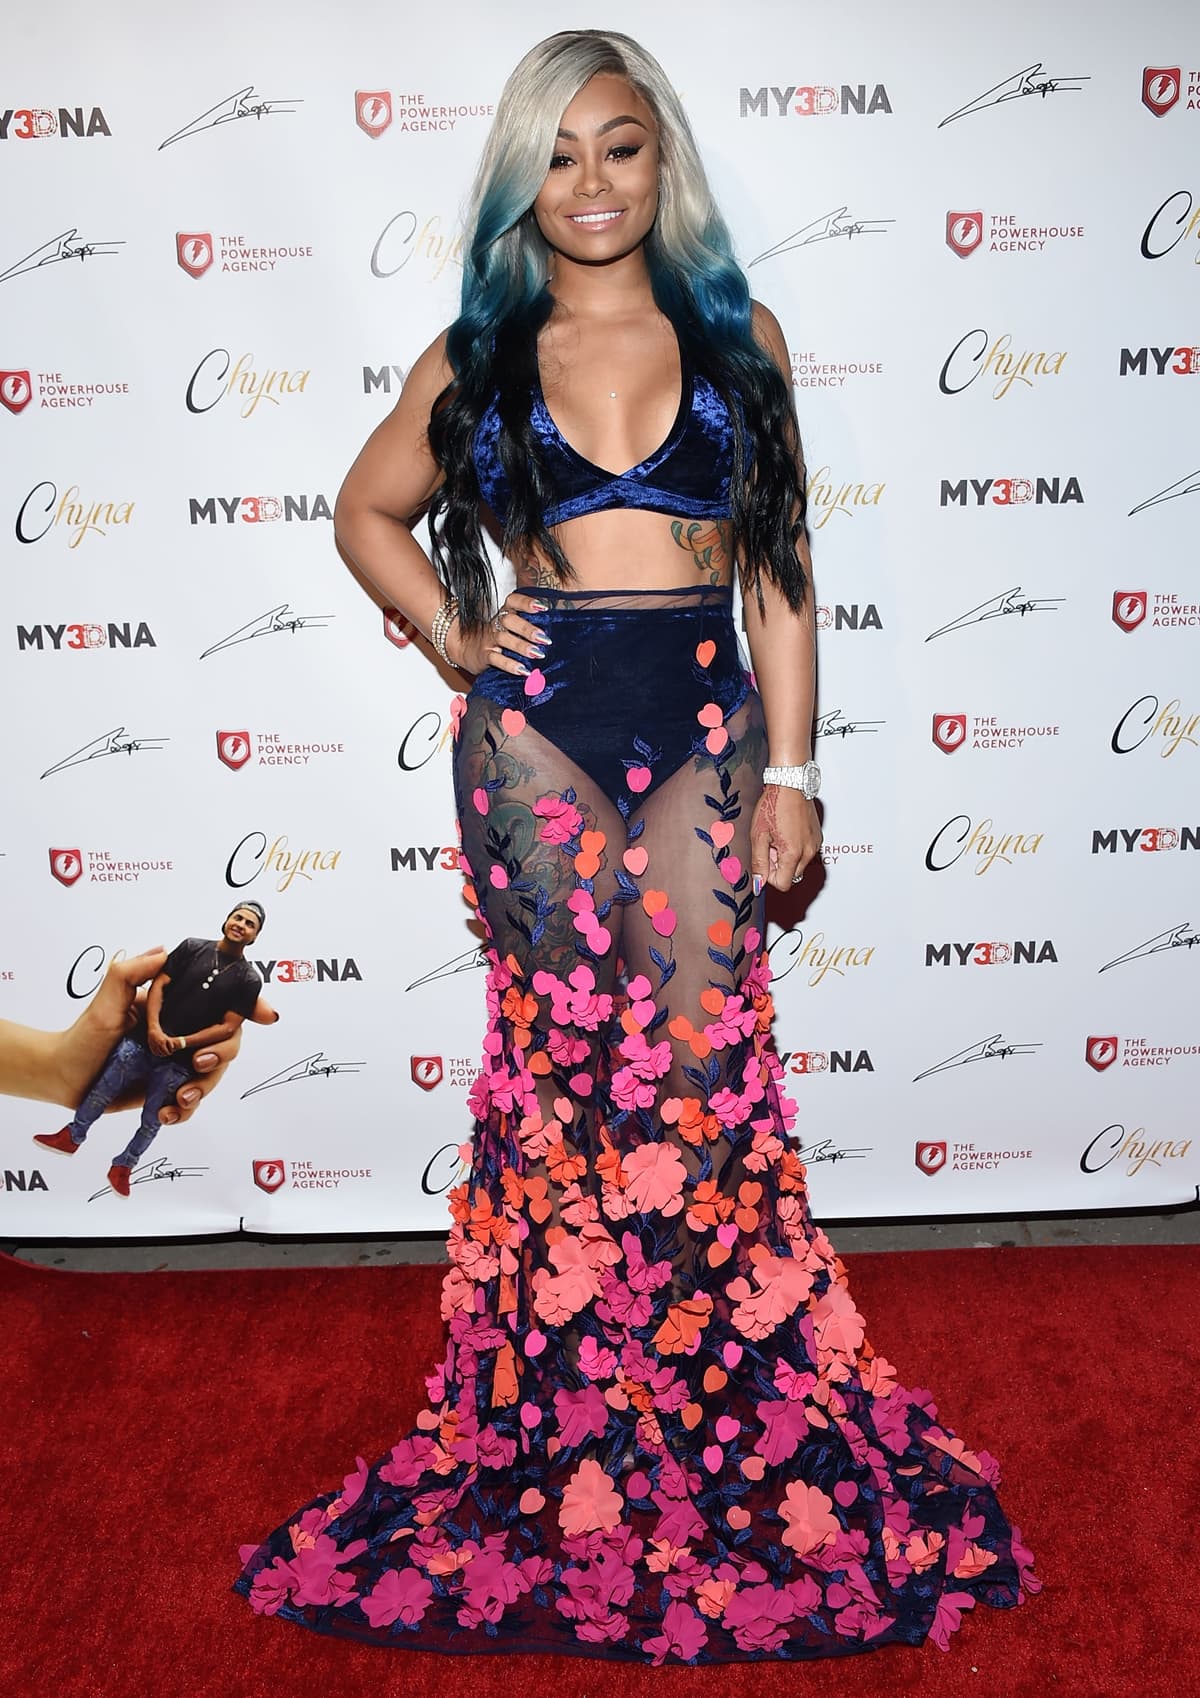 Blac Chyna wears a custom crushed velvet and 3D Floral dress by Shane Justin at the Blac Chyna Figurine Doll Launch